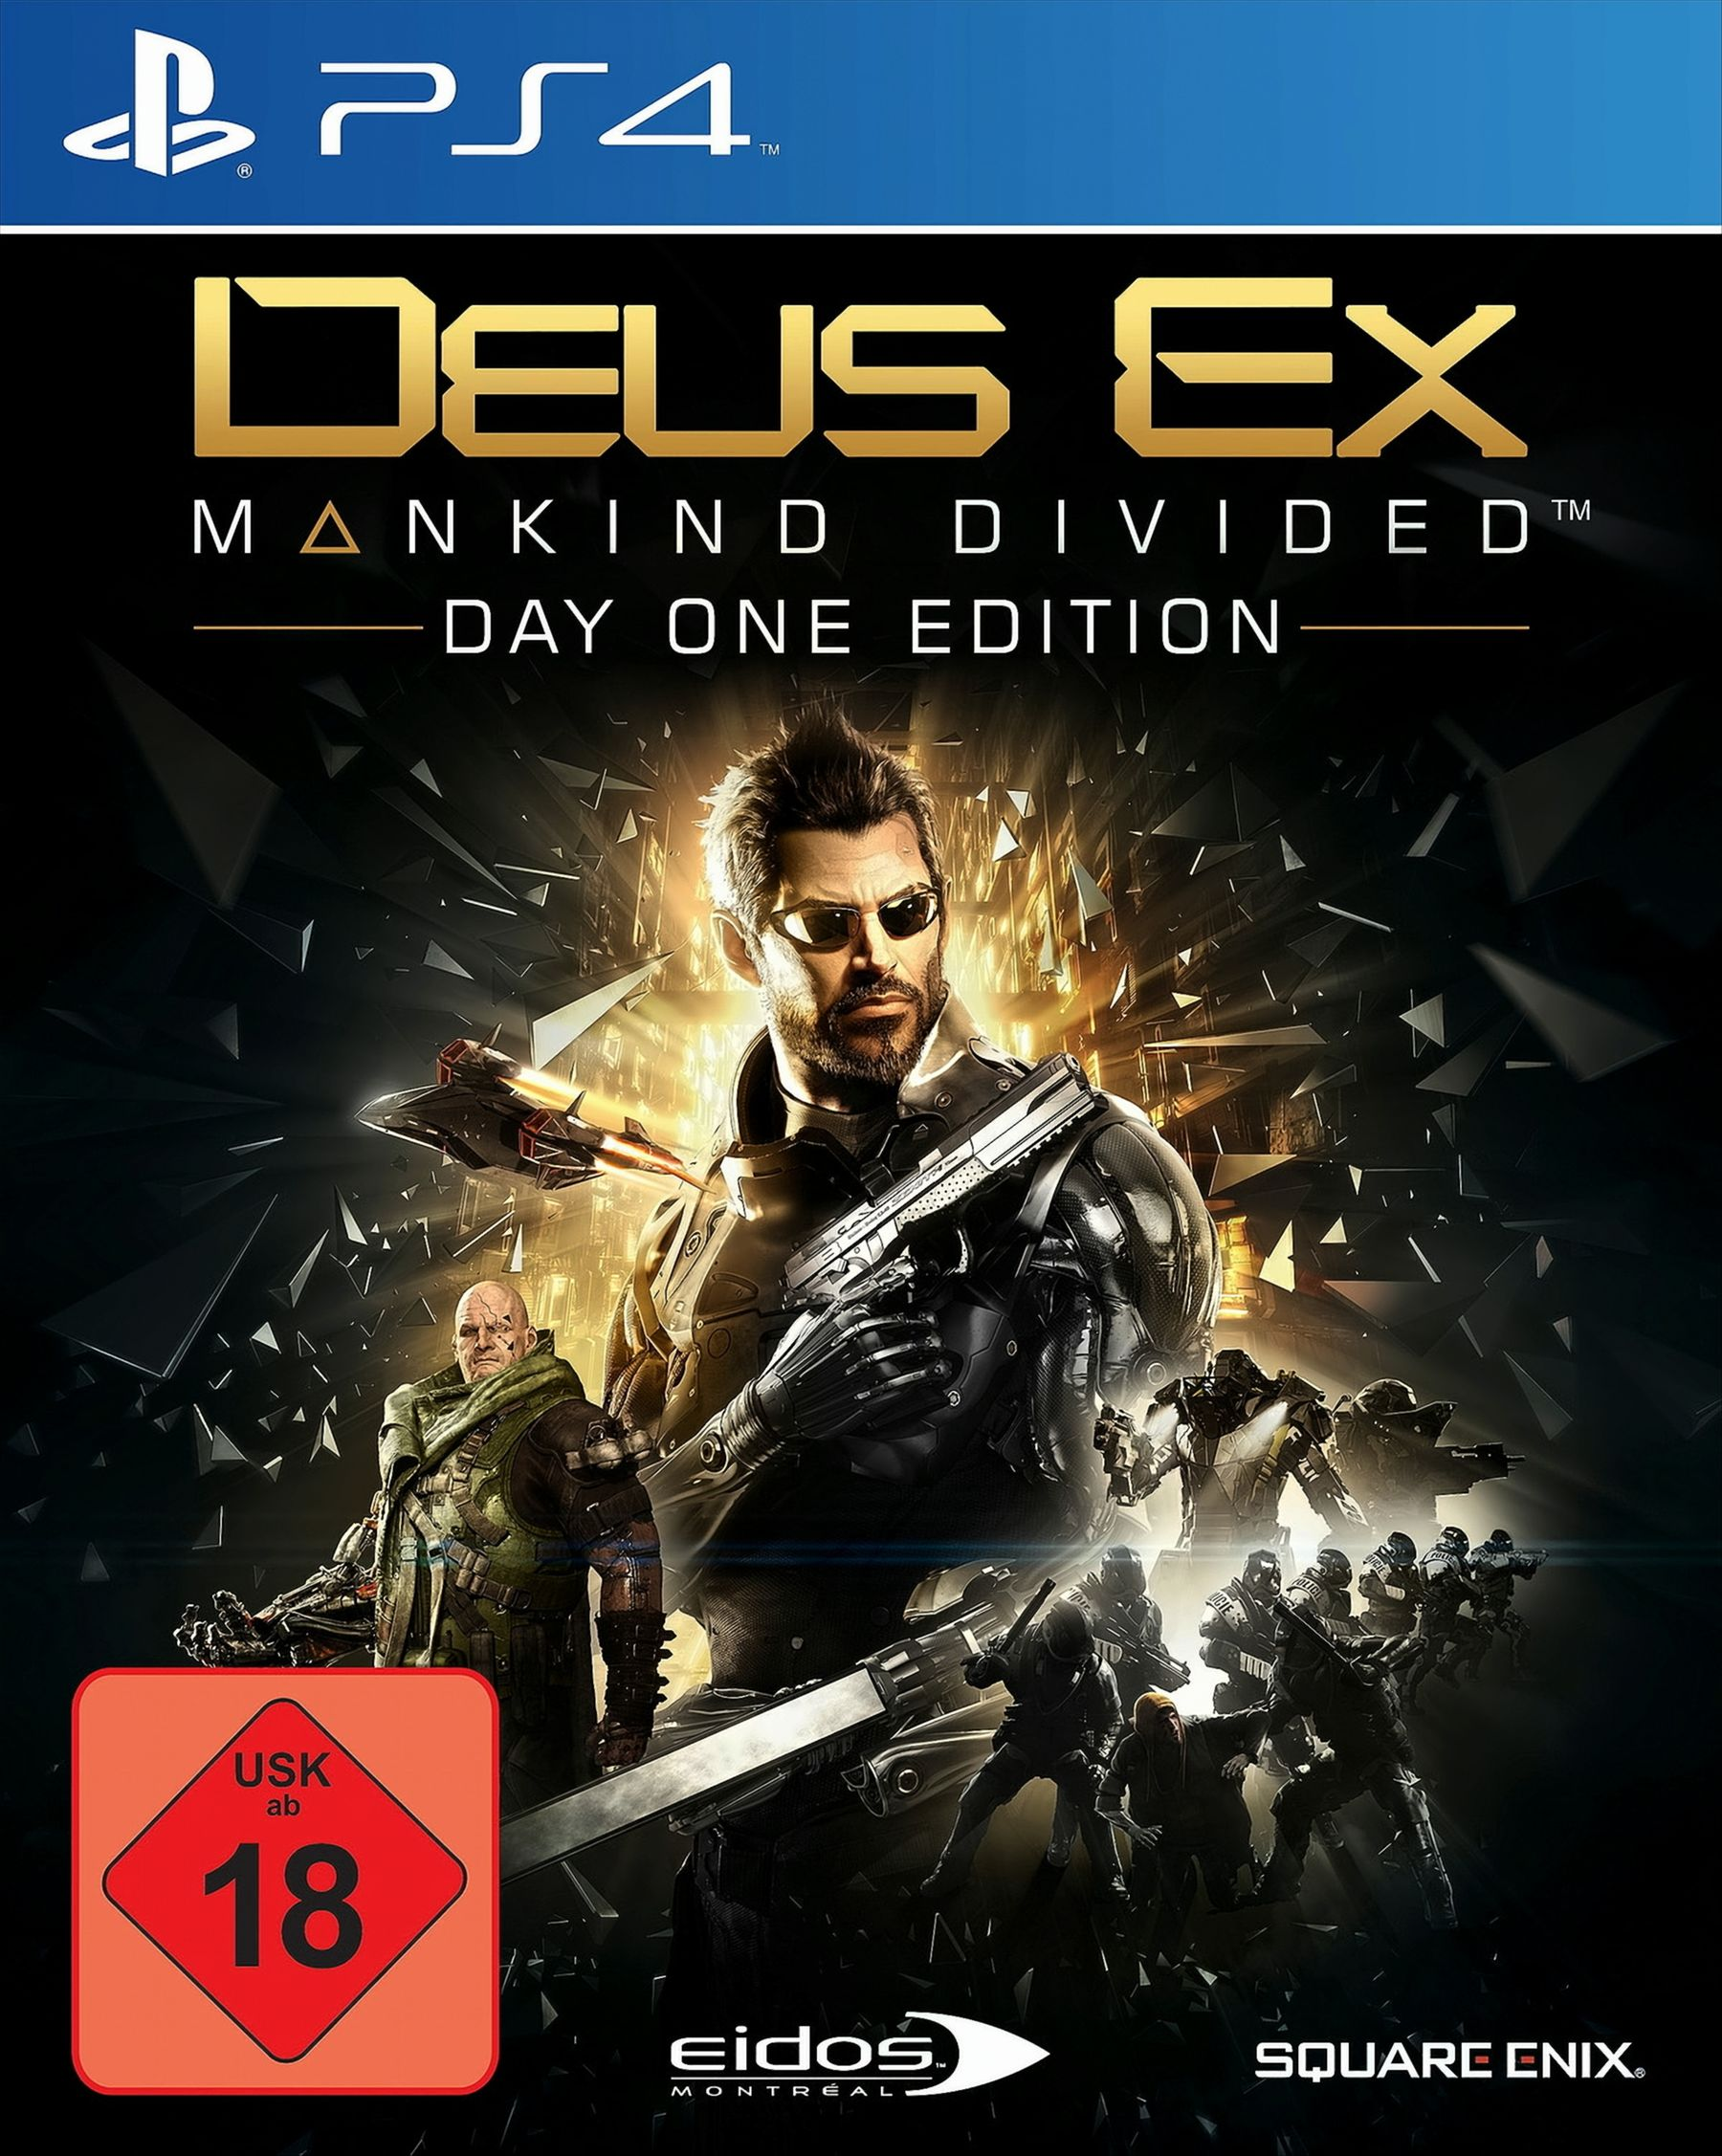 Divided 4] Mankind Ex: Edition Deus One - Day - [PlayStation